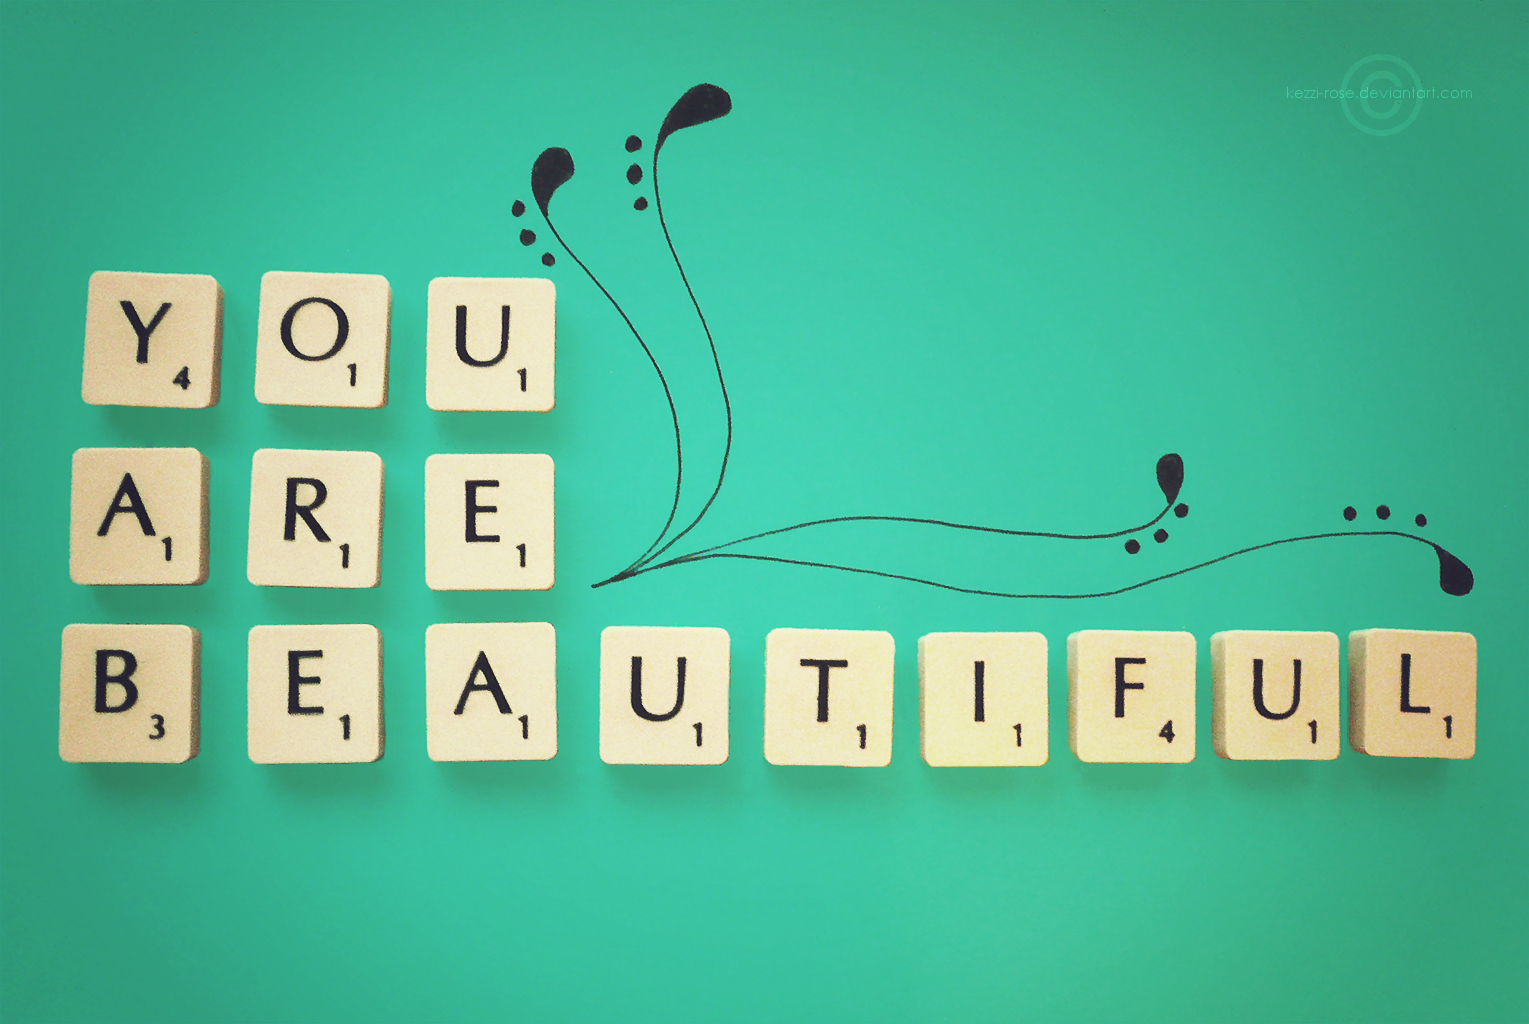 You are beautiful thing. You are. You are picture. You are beautiful. You are beautiful picture.